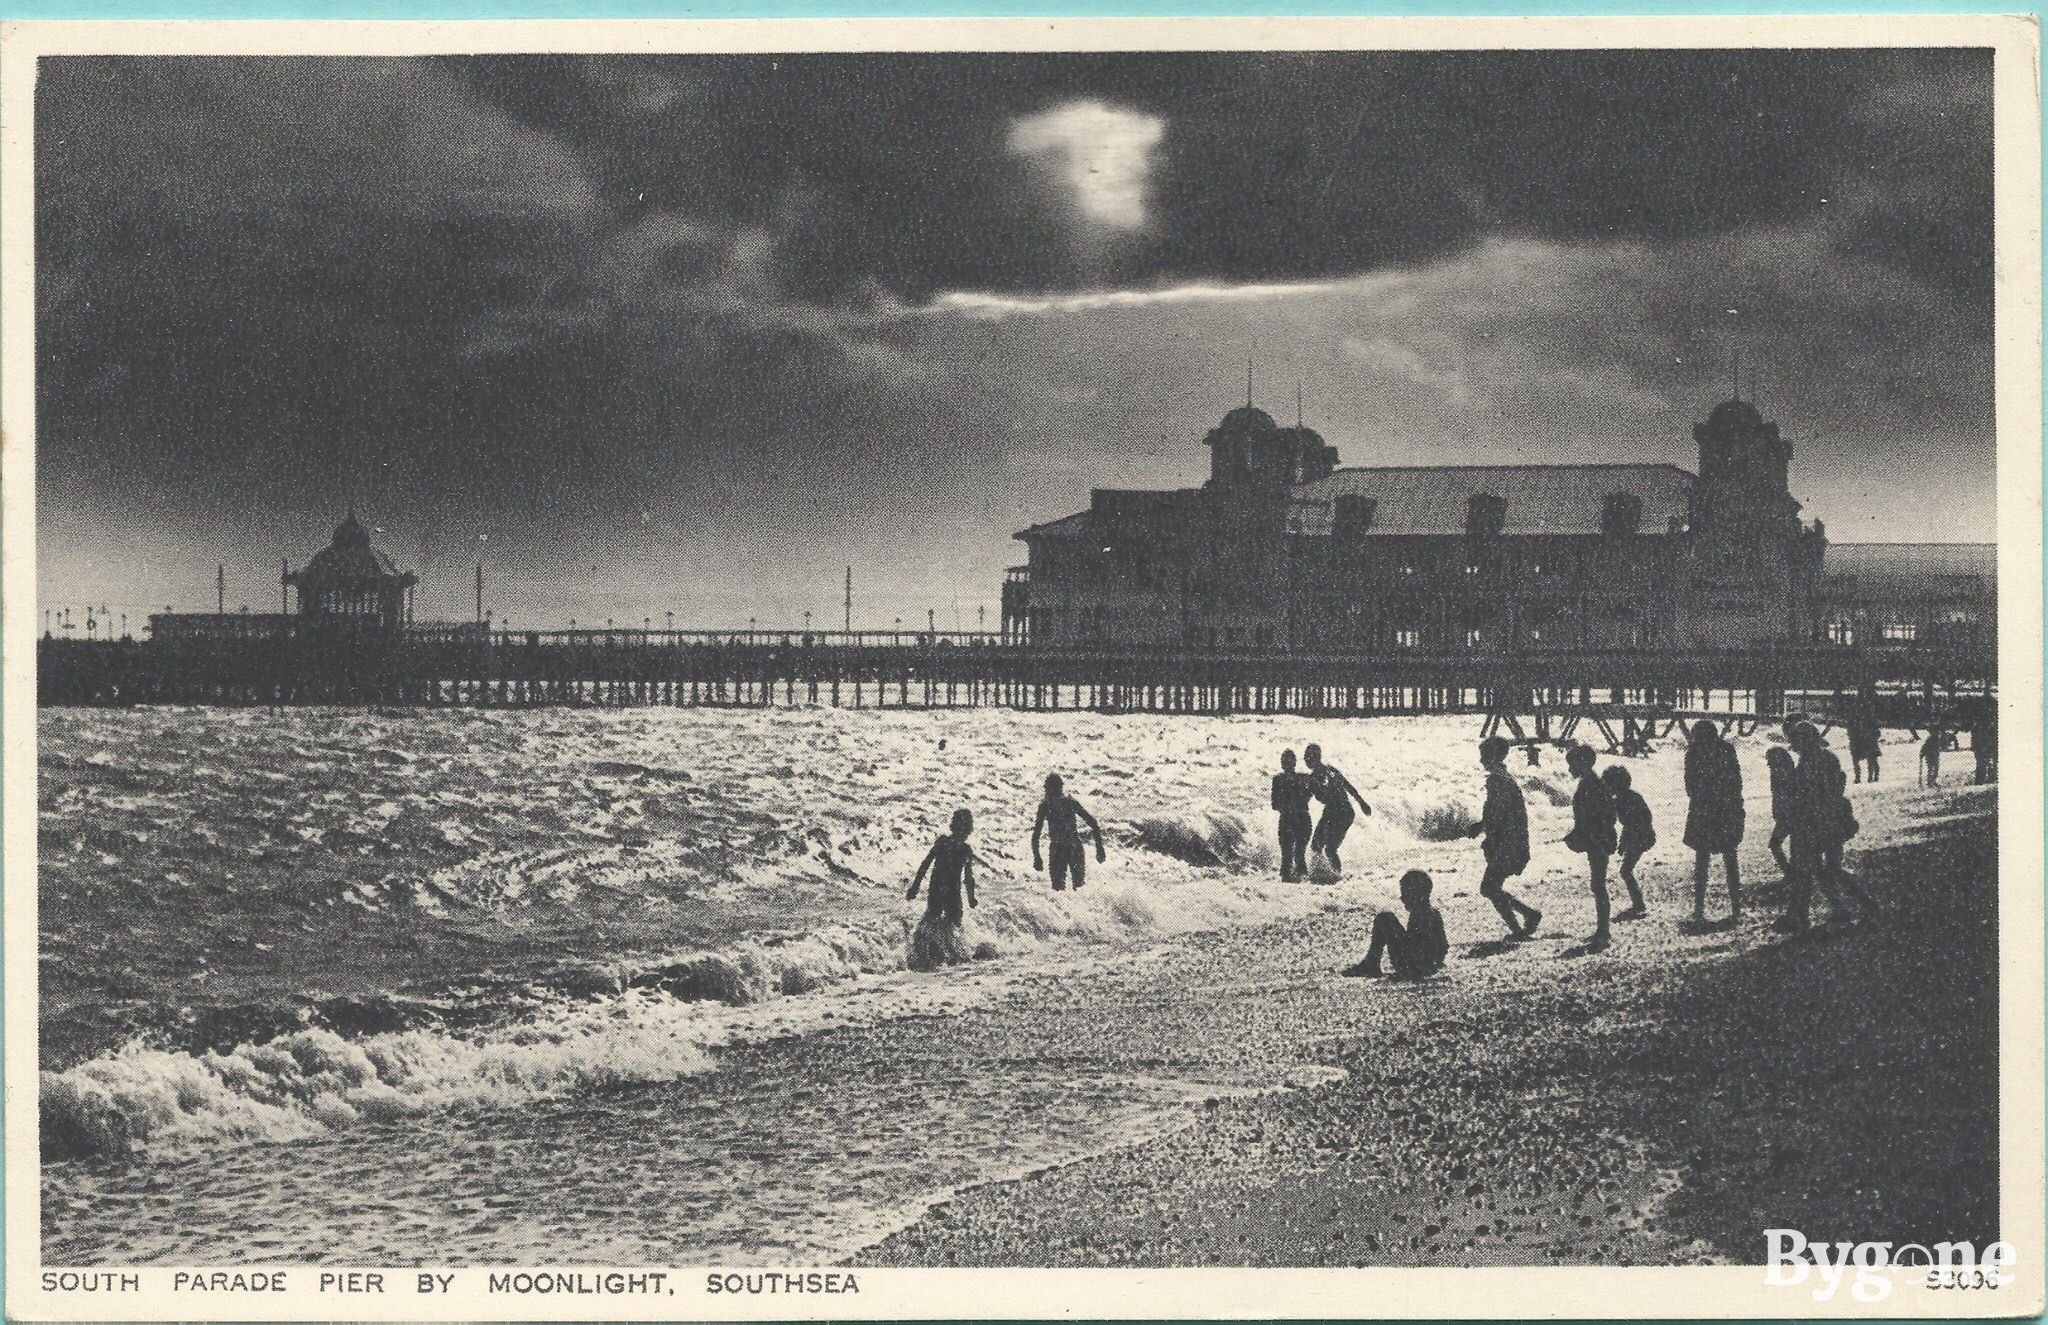 South Parade Pier by Moonlight